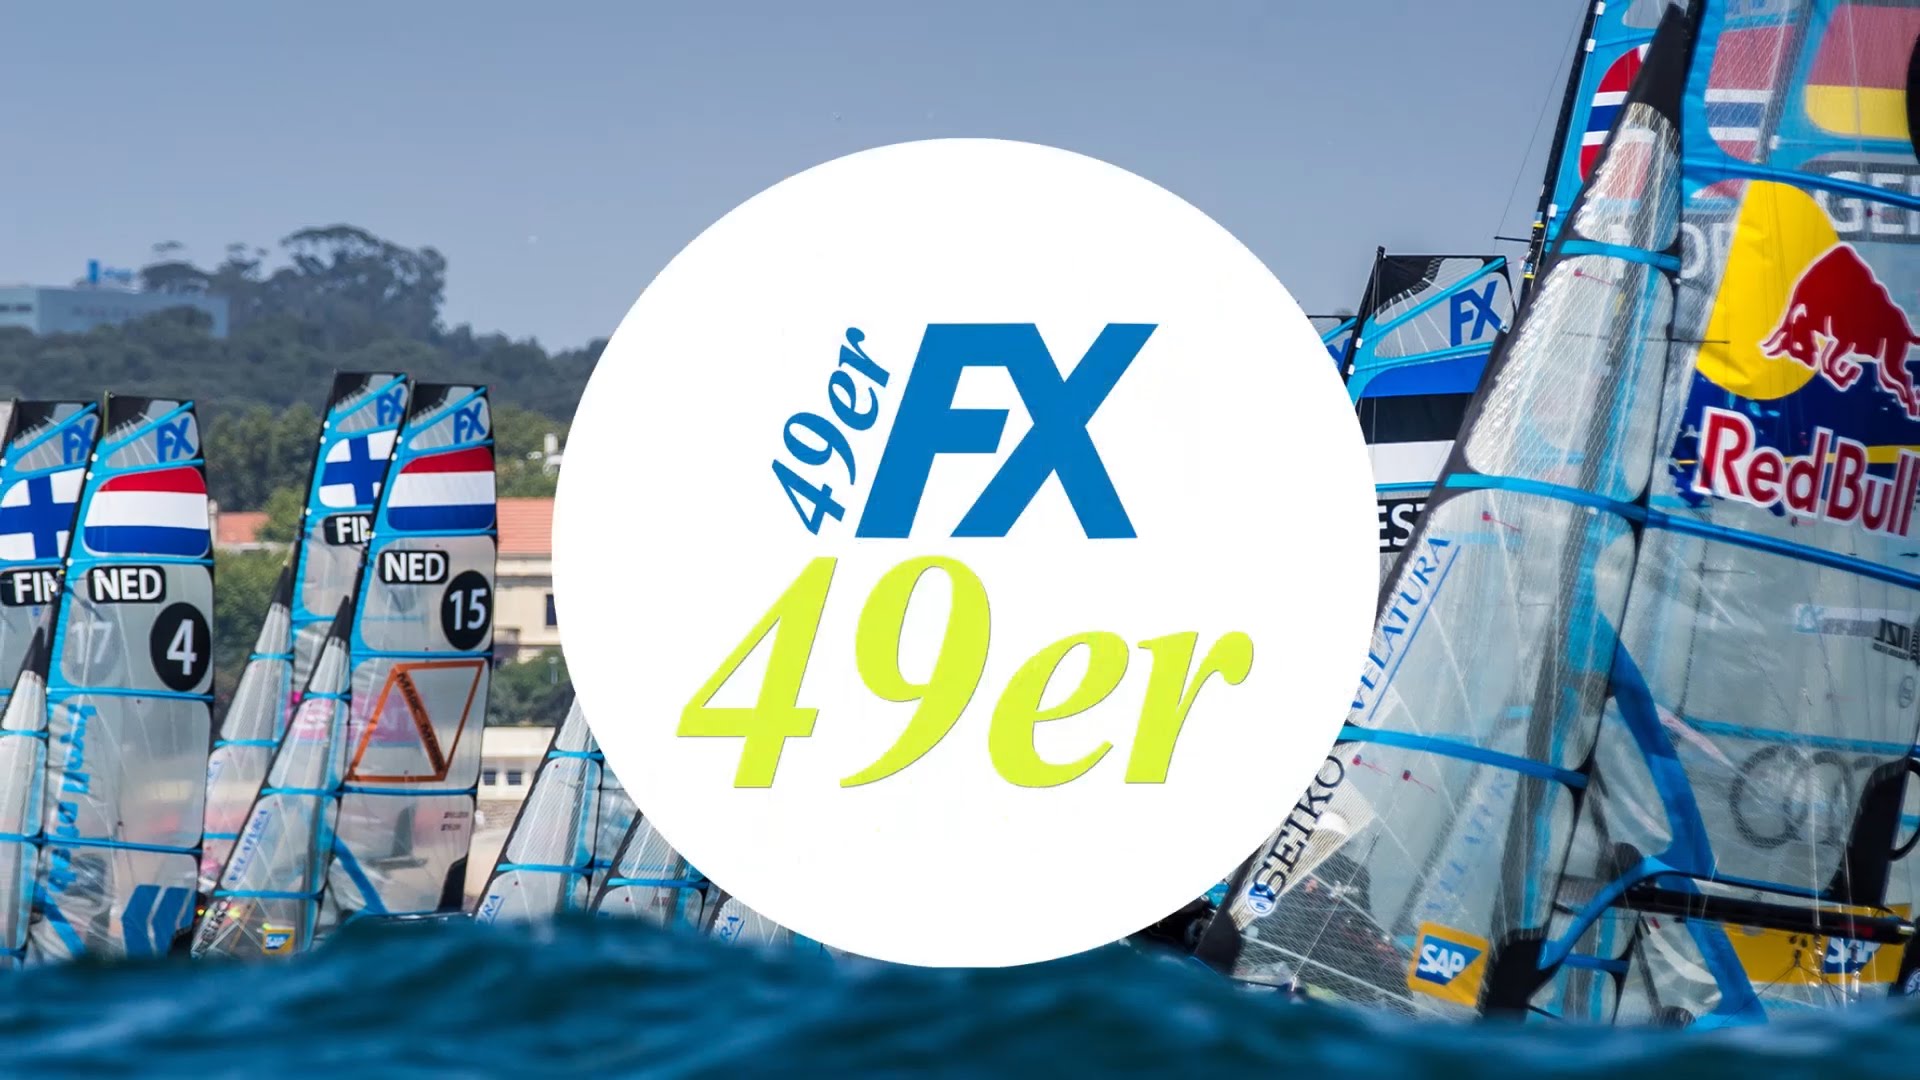 49er Worlds 2015 – Buenos Aires – Tag 5